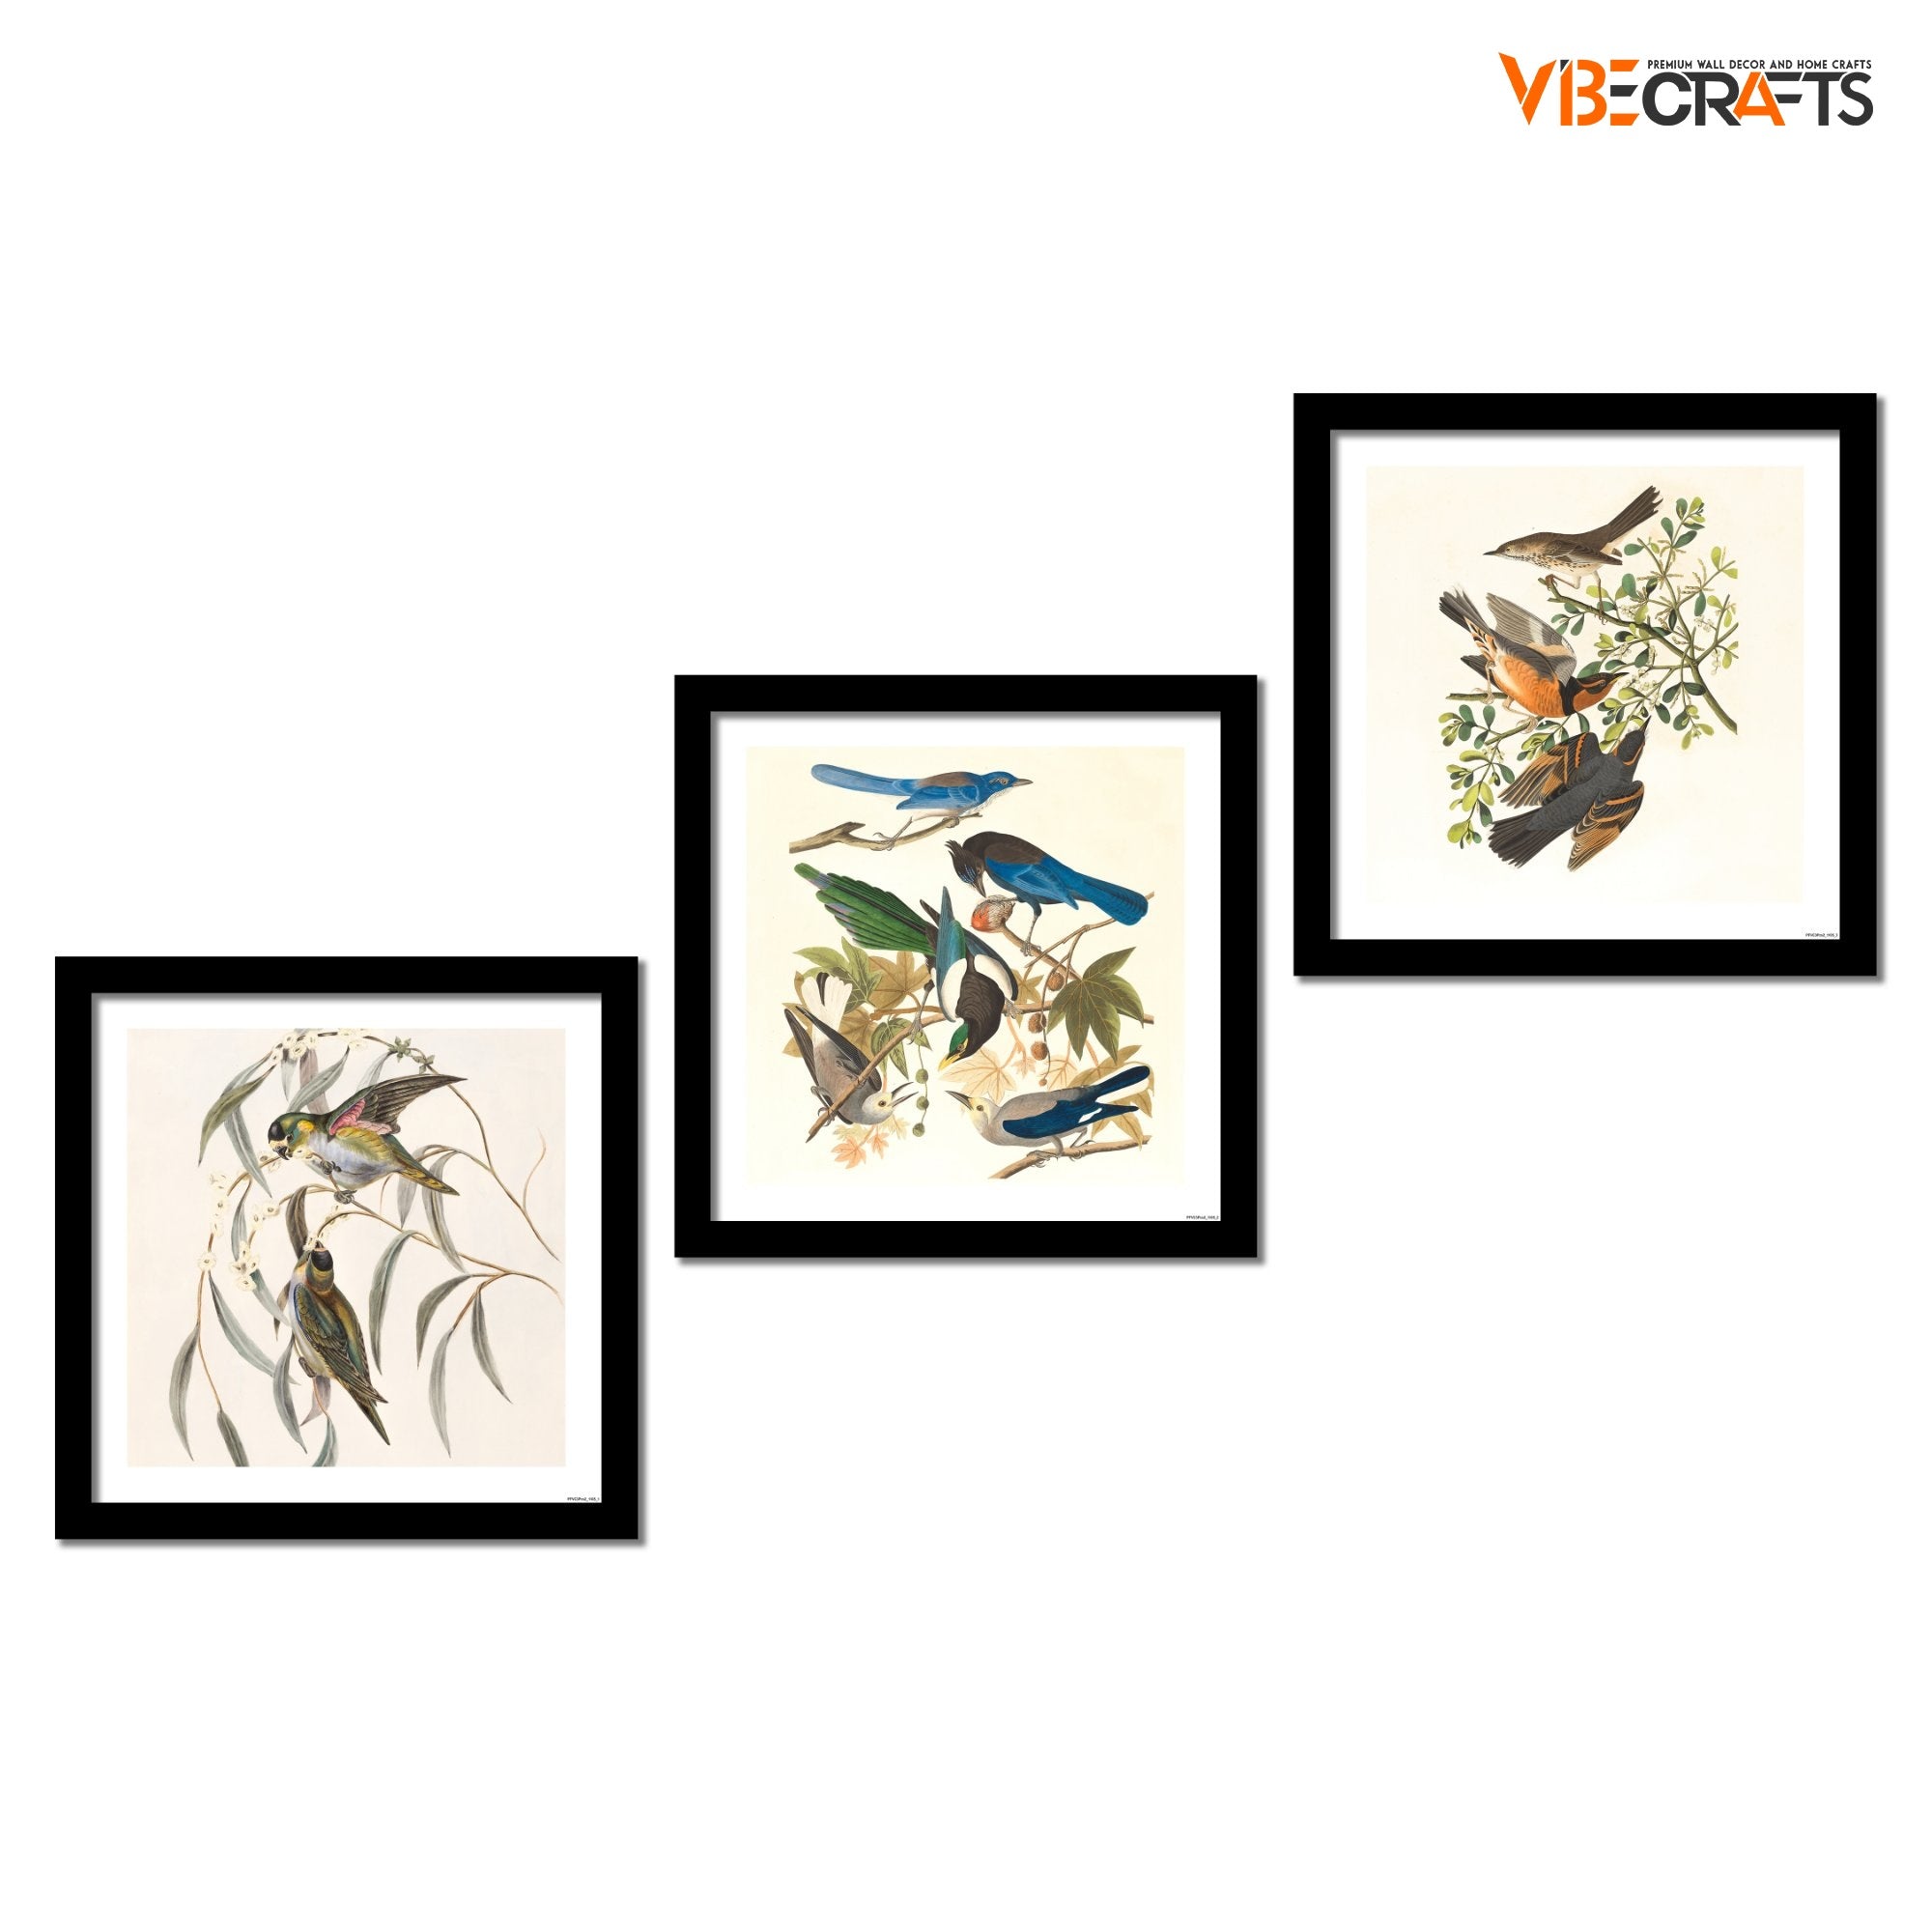 Premium 3 Pieces Wall Frame Painting of Birds on Tree Branch